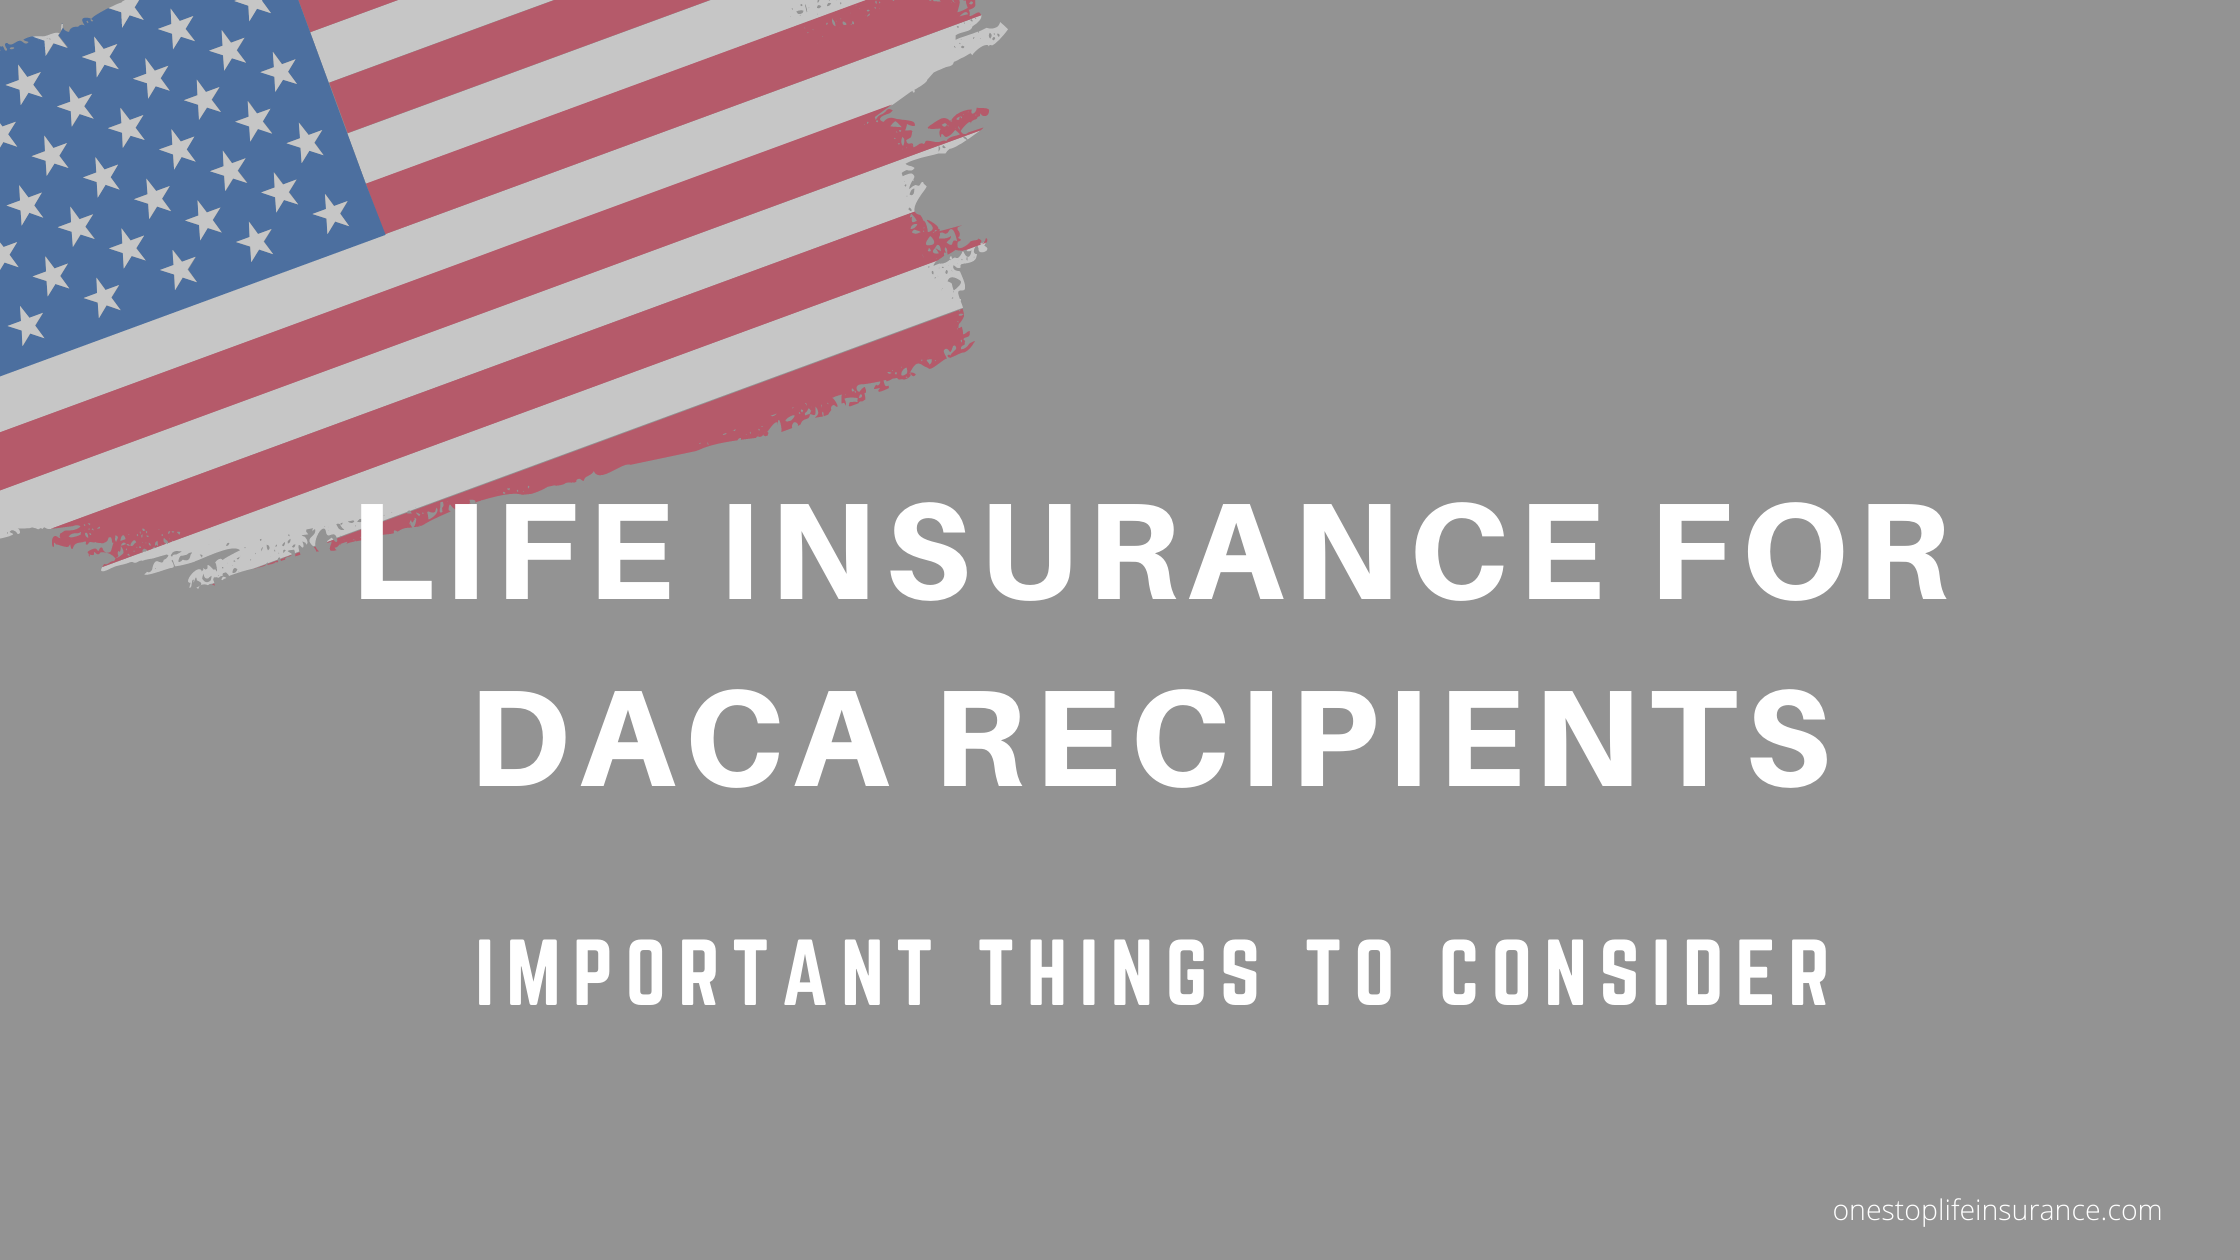 Life Insurance for DACA recipients important things to consider